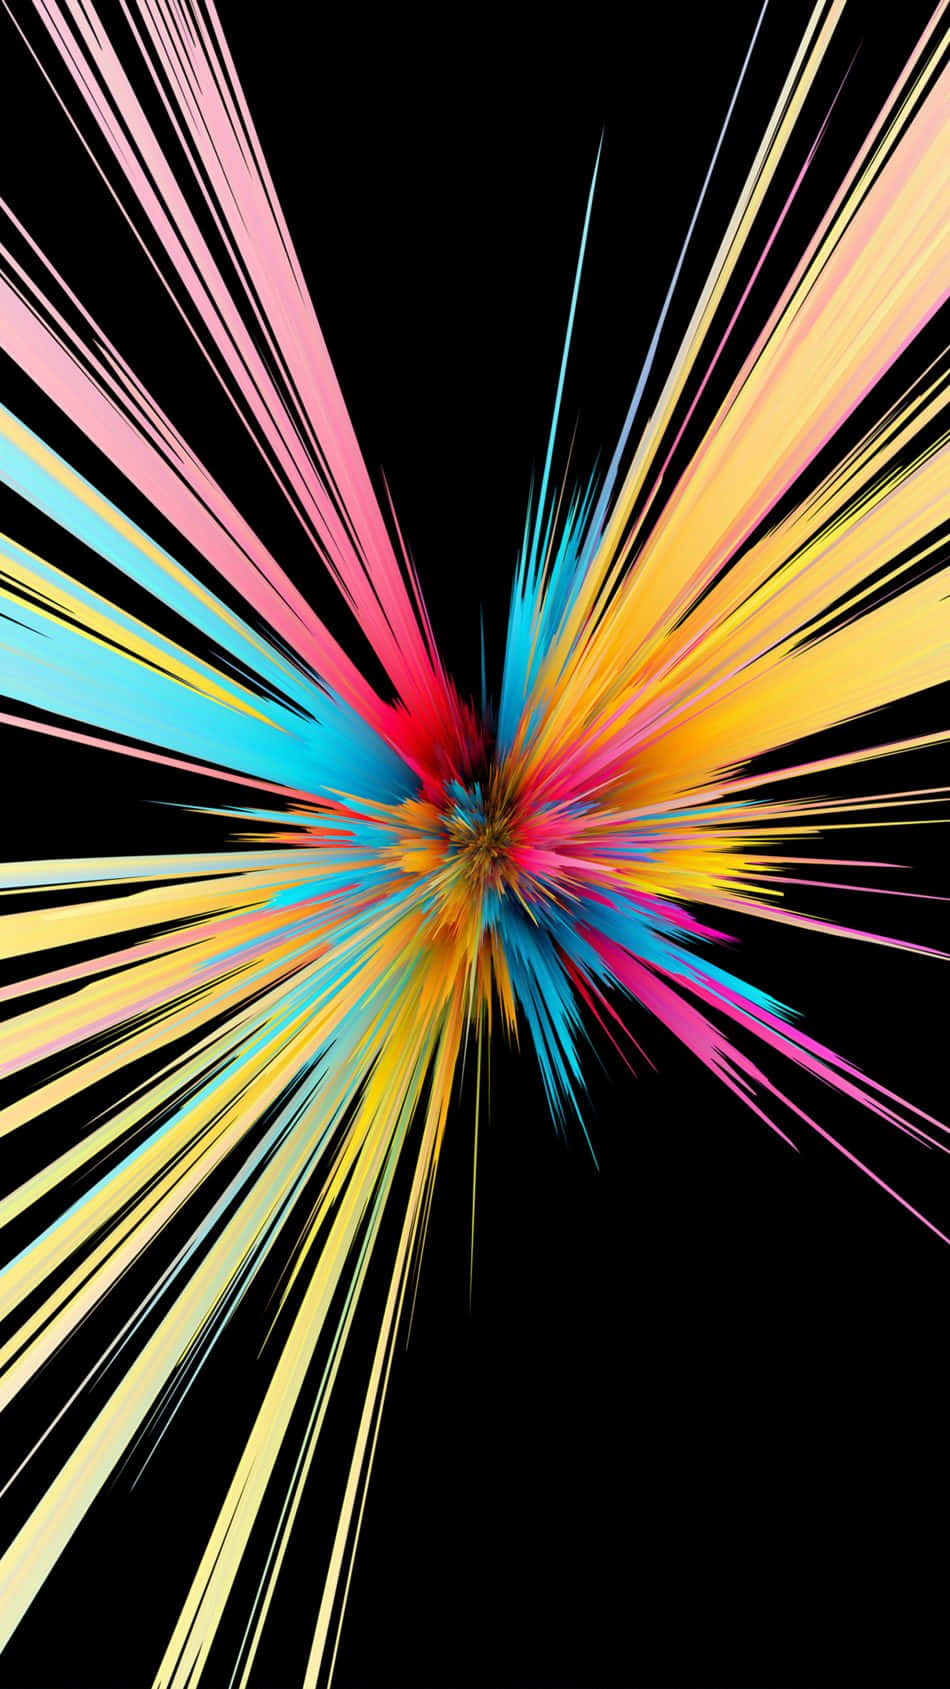 A Colorful Burst Of Light On A Black Background Wallpaper